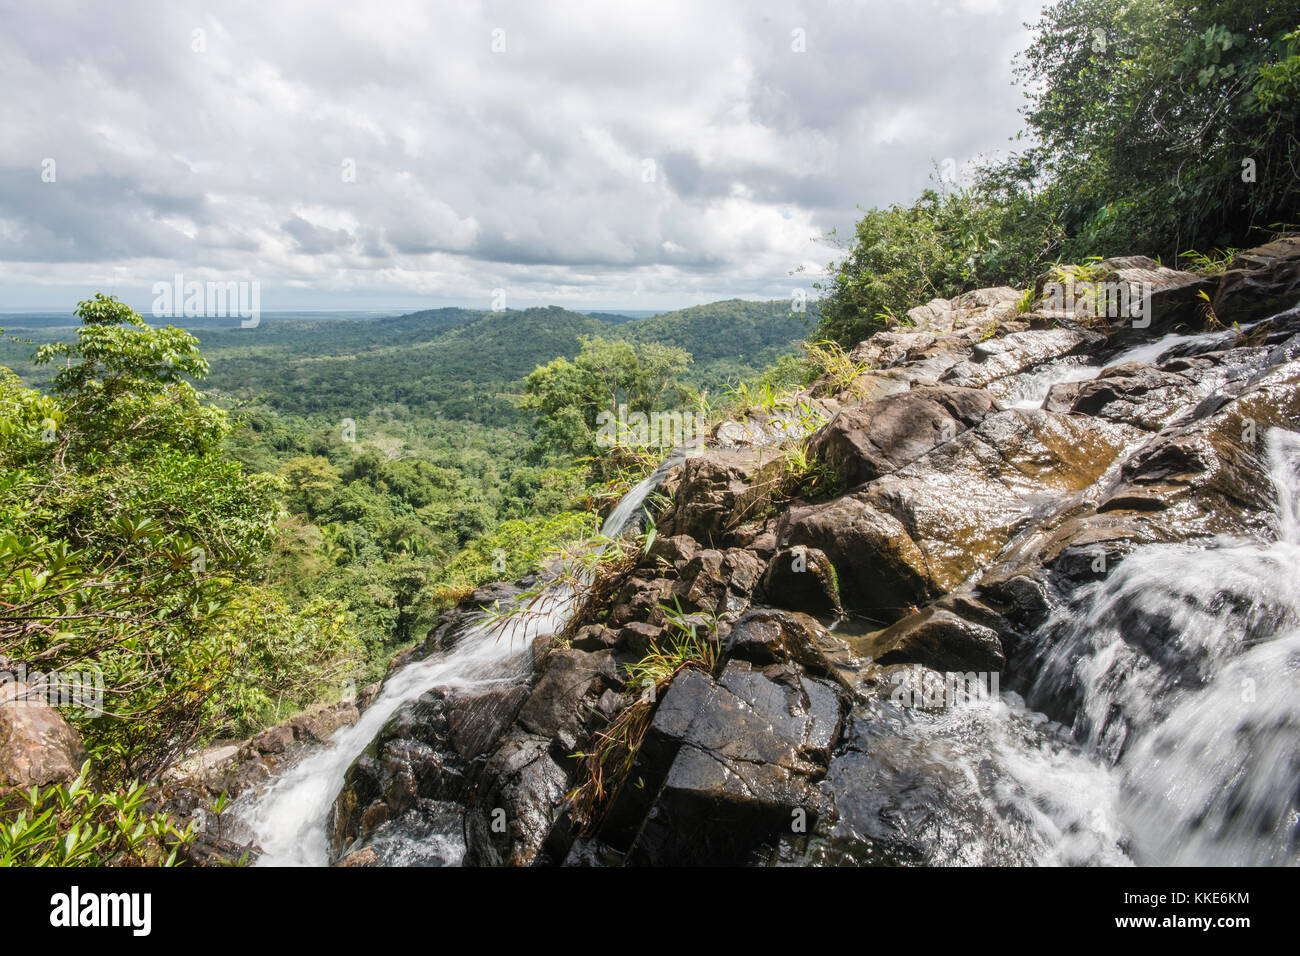 A rocky mountainside in the jungles of Belize with a stream splashing down the side of it.  A beautiful wilderness. Stock Photo